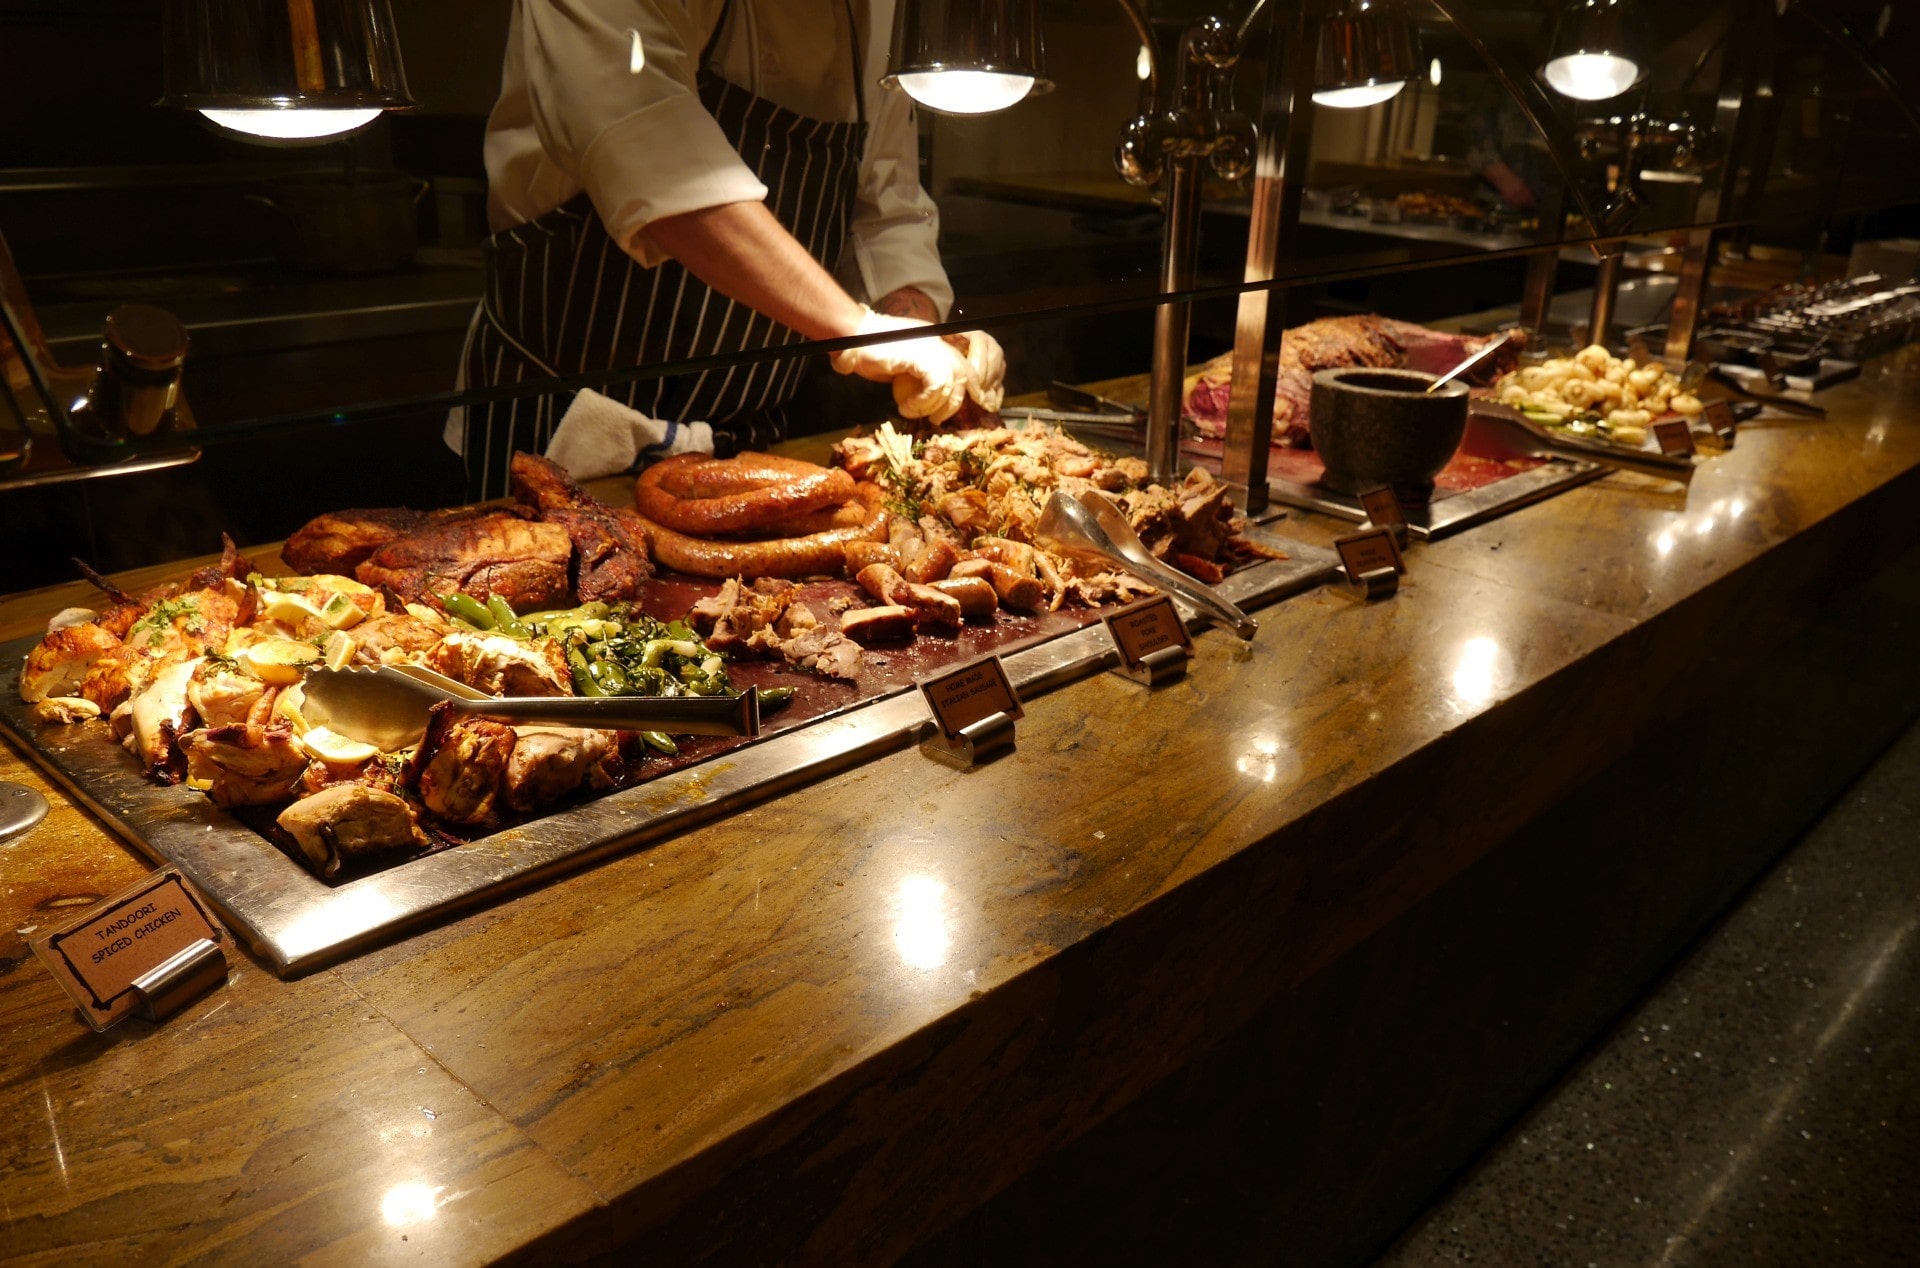 Exquisite culinary display at the Bacchanal Buffet in Caesars Palace, featuring a selection of entrees, from Tandoori spiced chicken to homemade Italian sausages, complemented by an elegant ambiance.